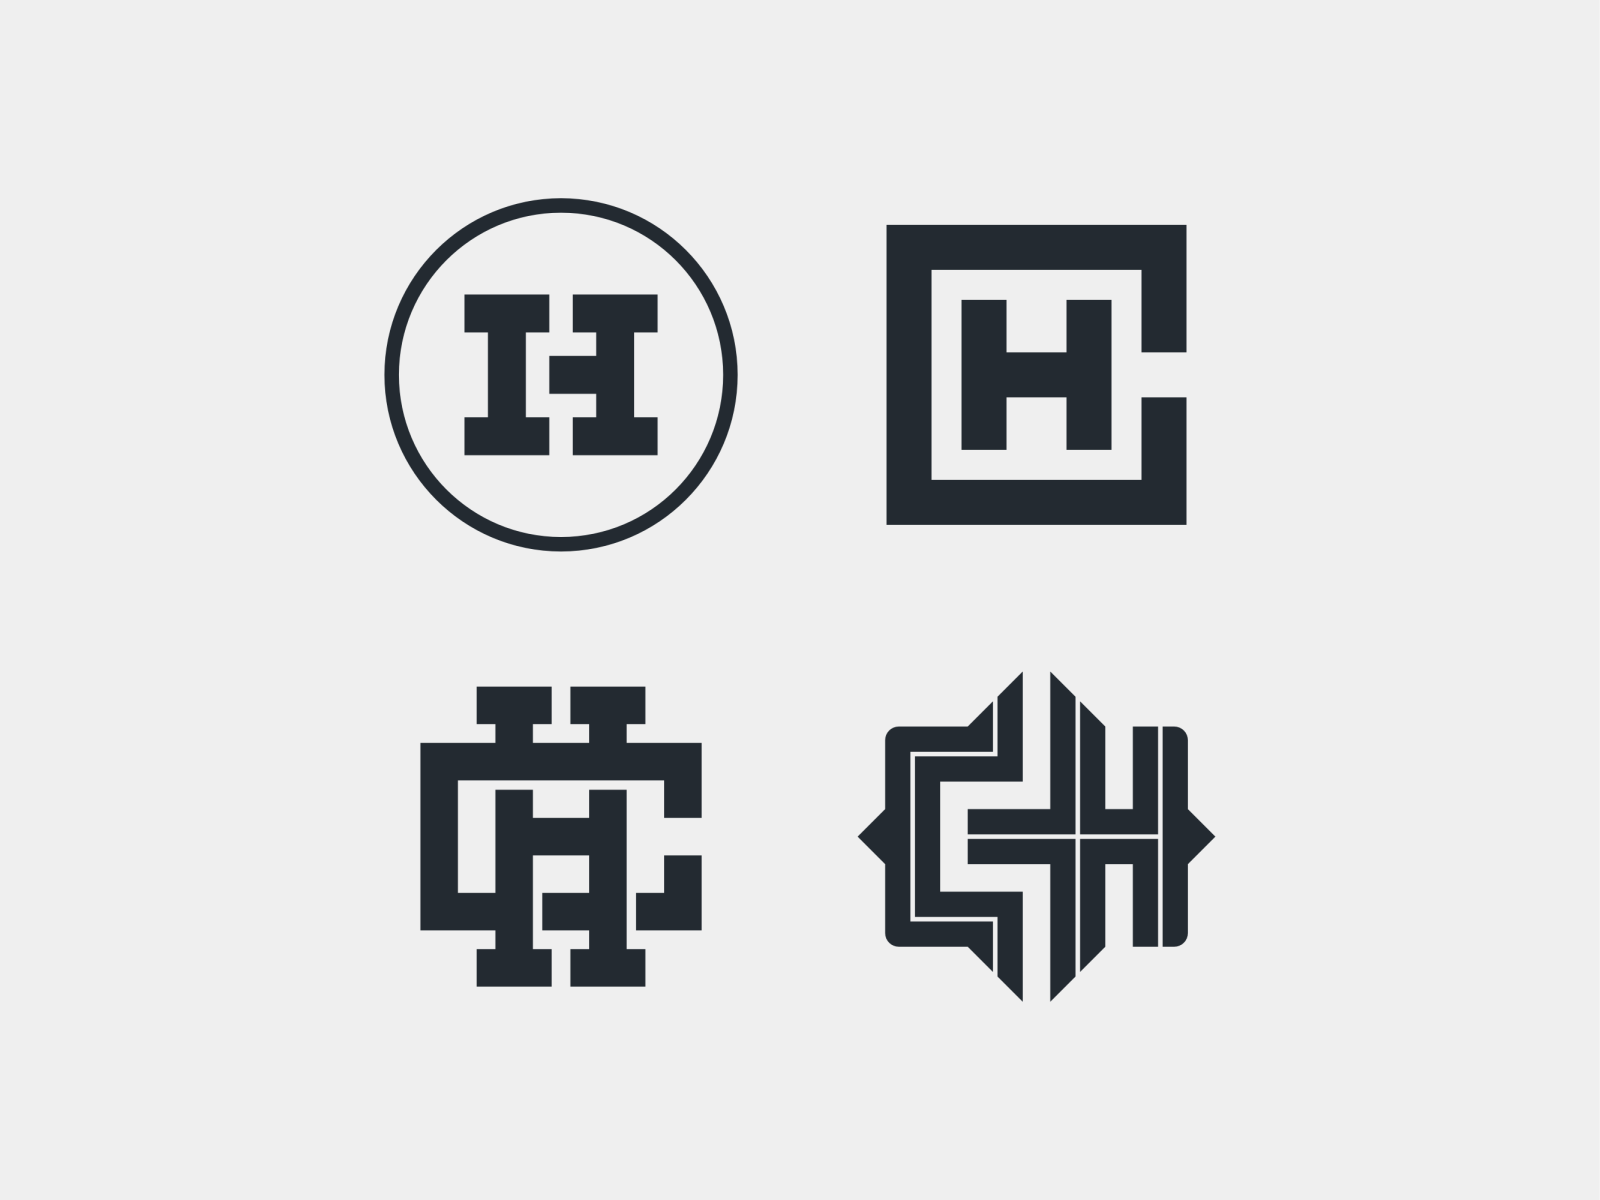 CH - Explorations by Daniel Rotter on Dribbble